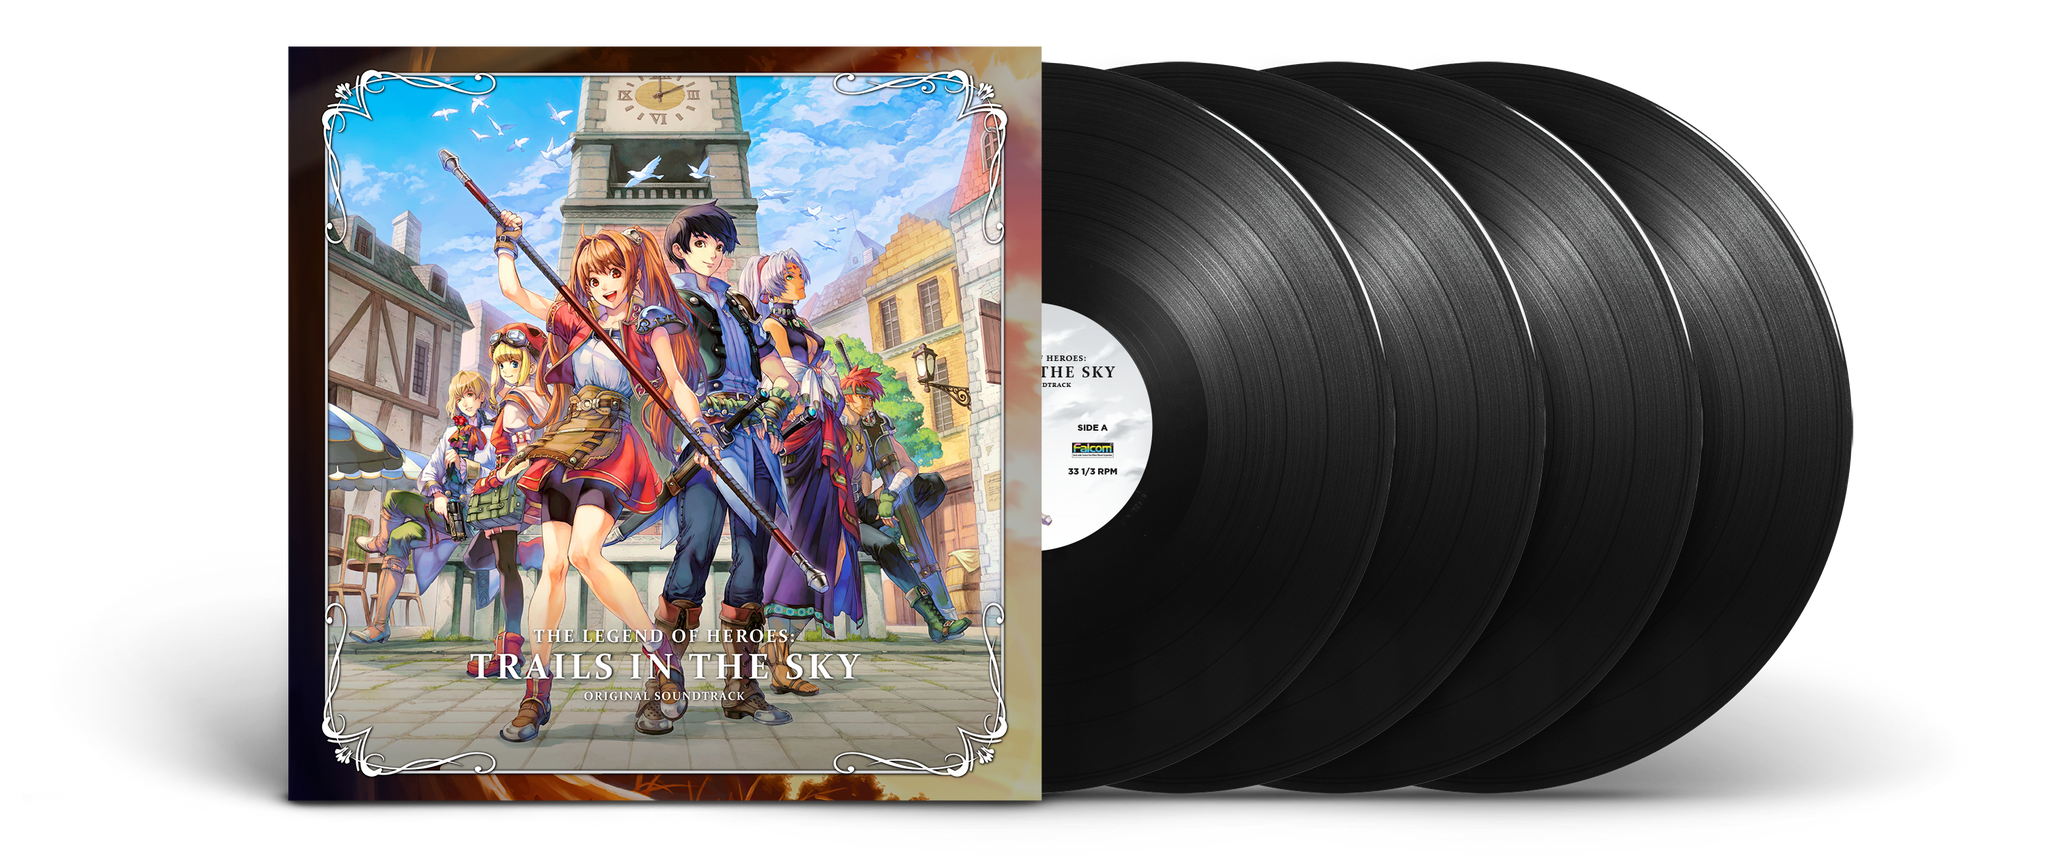 The Legend of Heroes Trails In the Sky Original Soundtrack